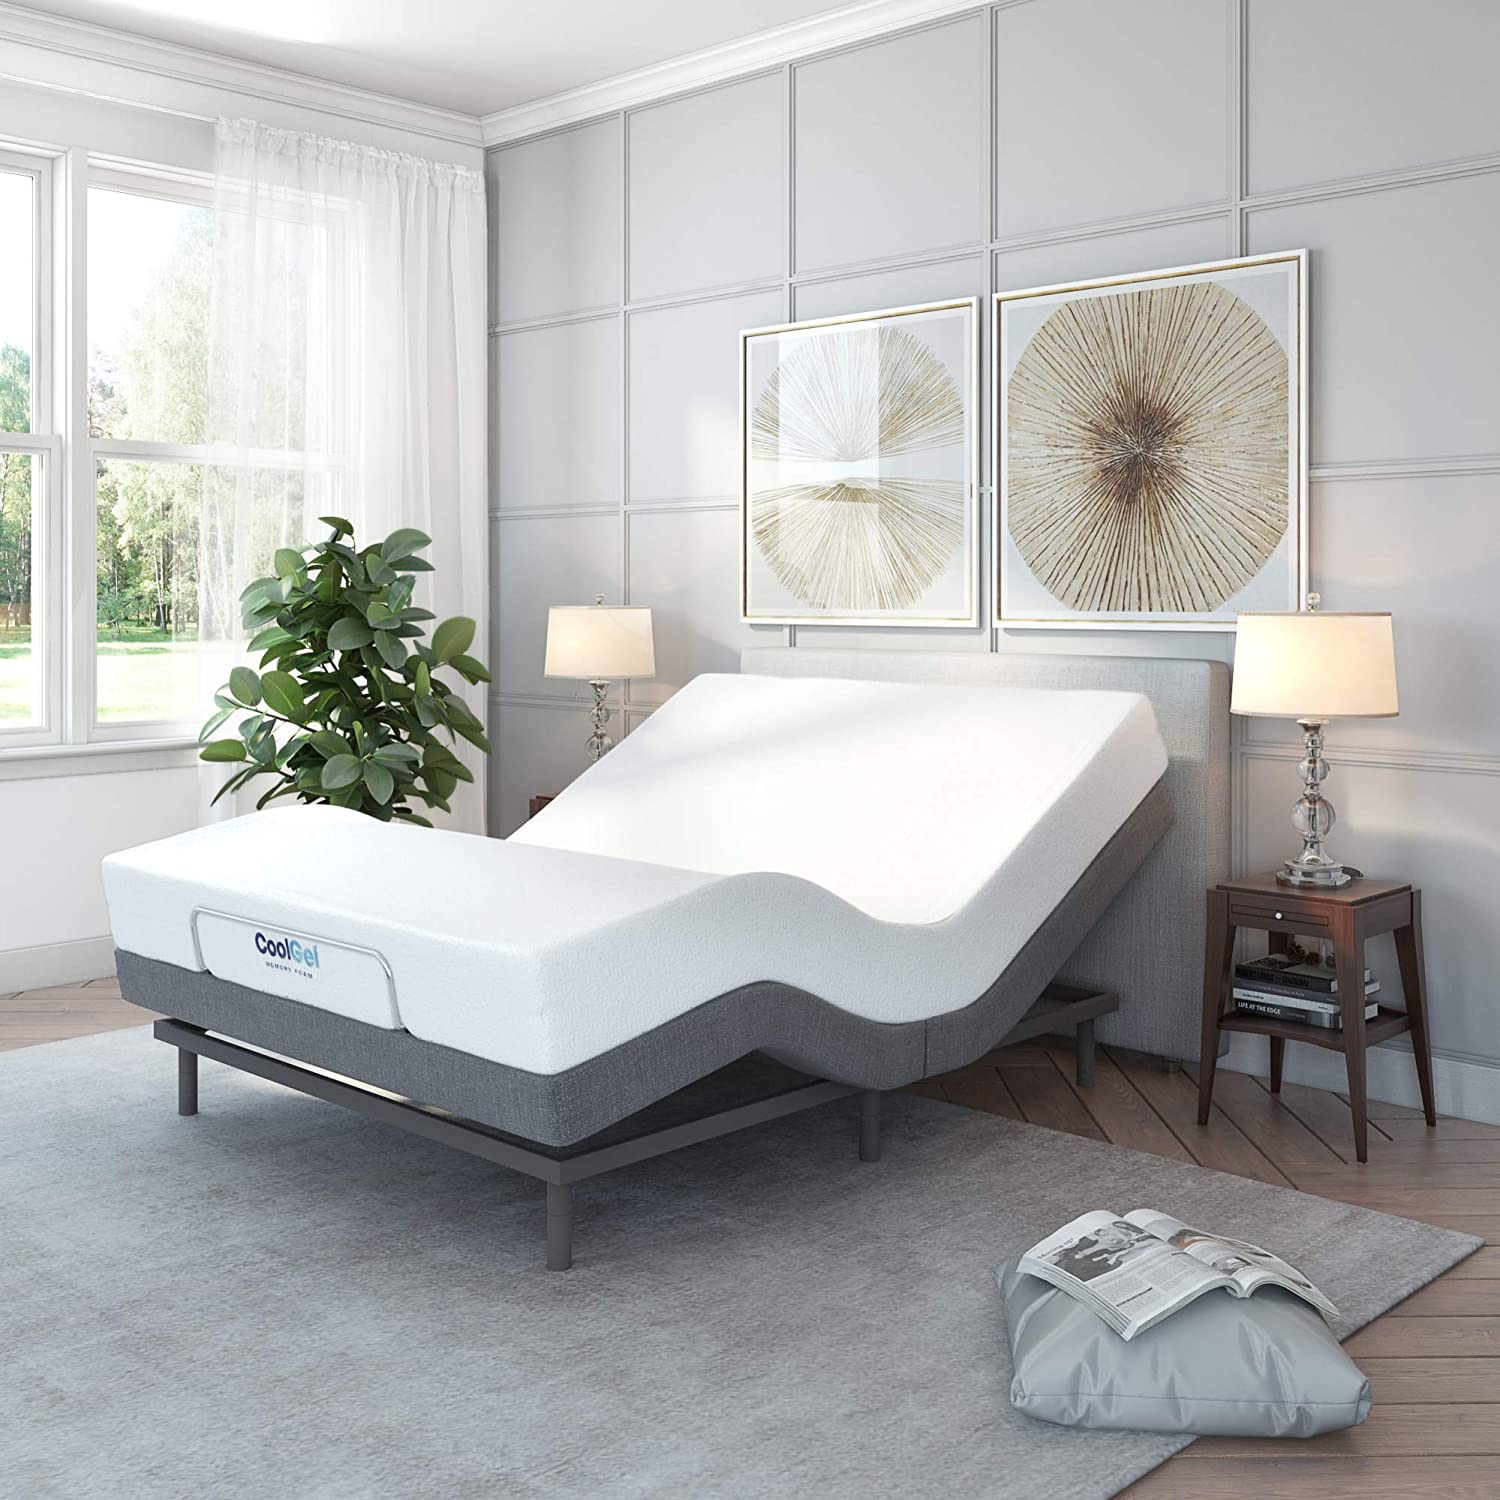 Advantages Of An Adjustable Bed